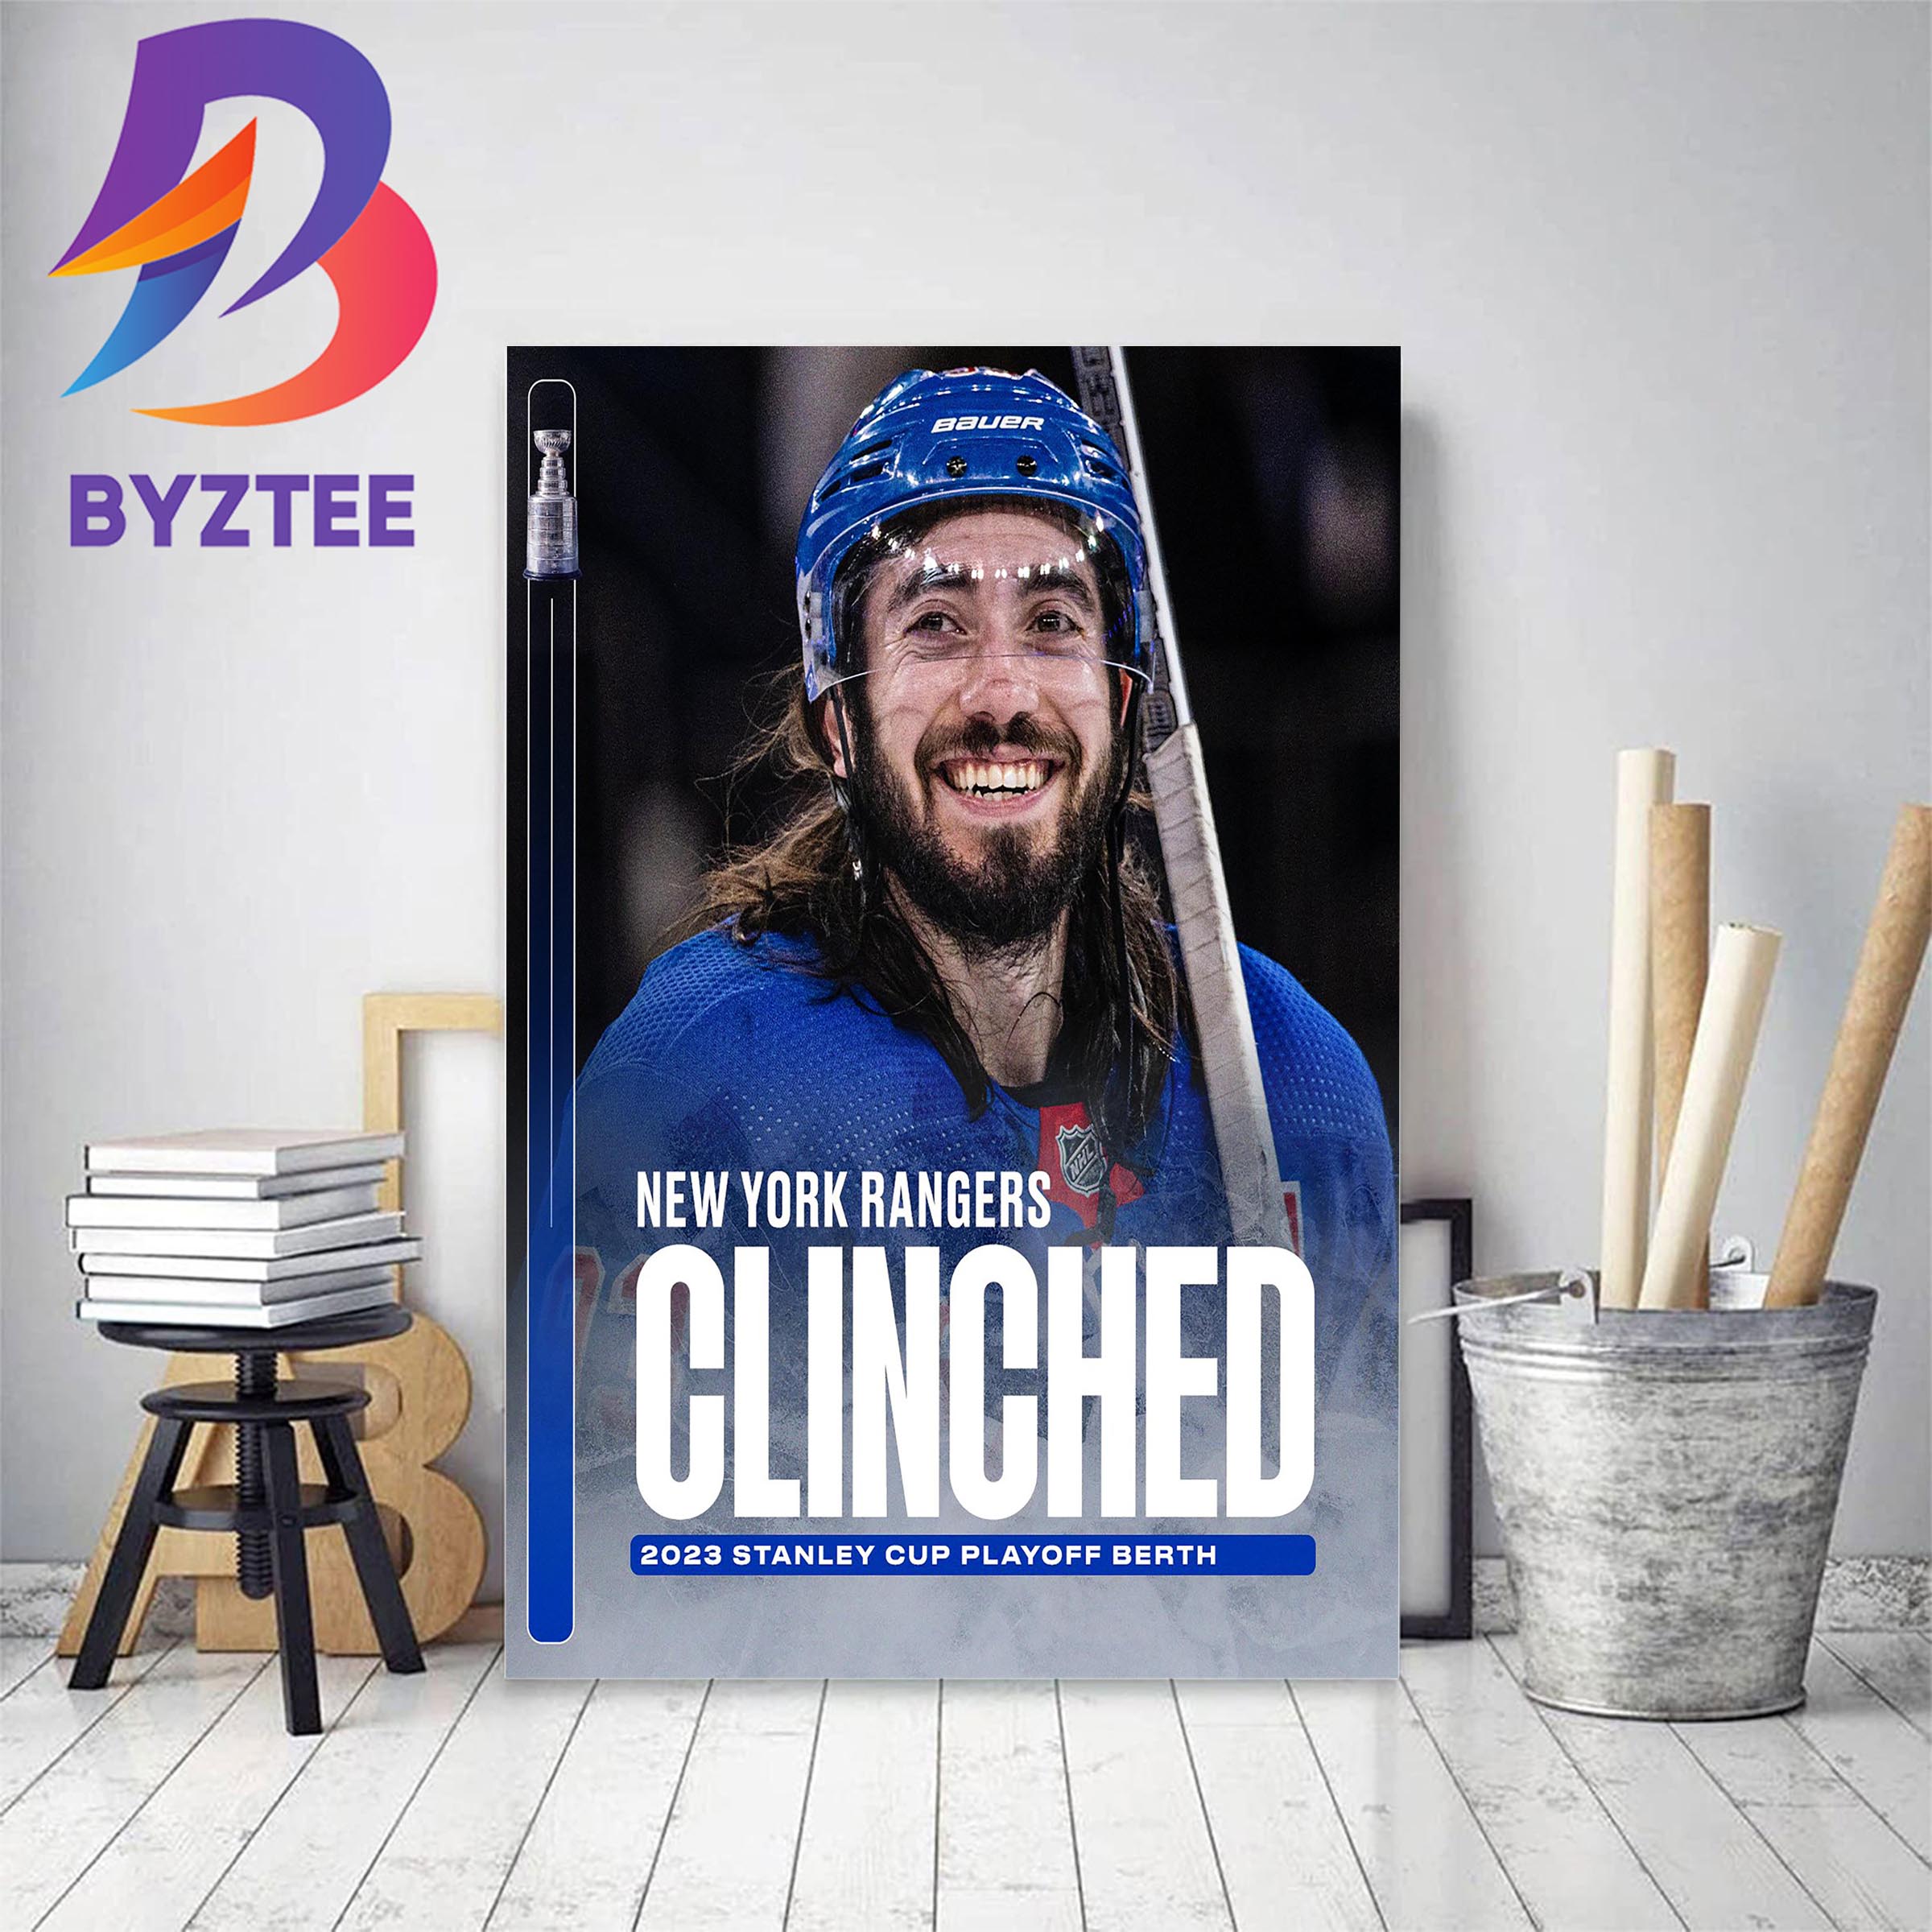 https://byztee.com/wp-content/uploads/2023/03/New-York-Rangers-Clinched-2023-Stanley-Cup-Playoffs-Berth-Decor-Poster-Canvas_52758380-1.jpg